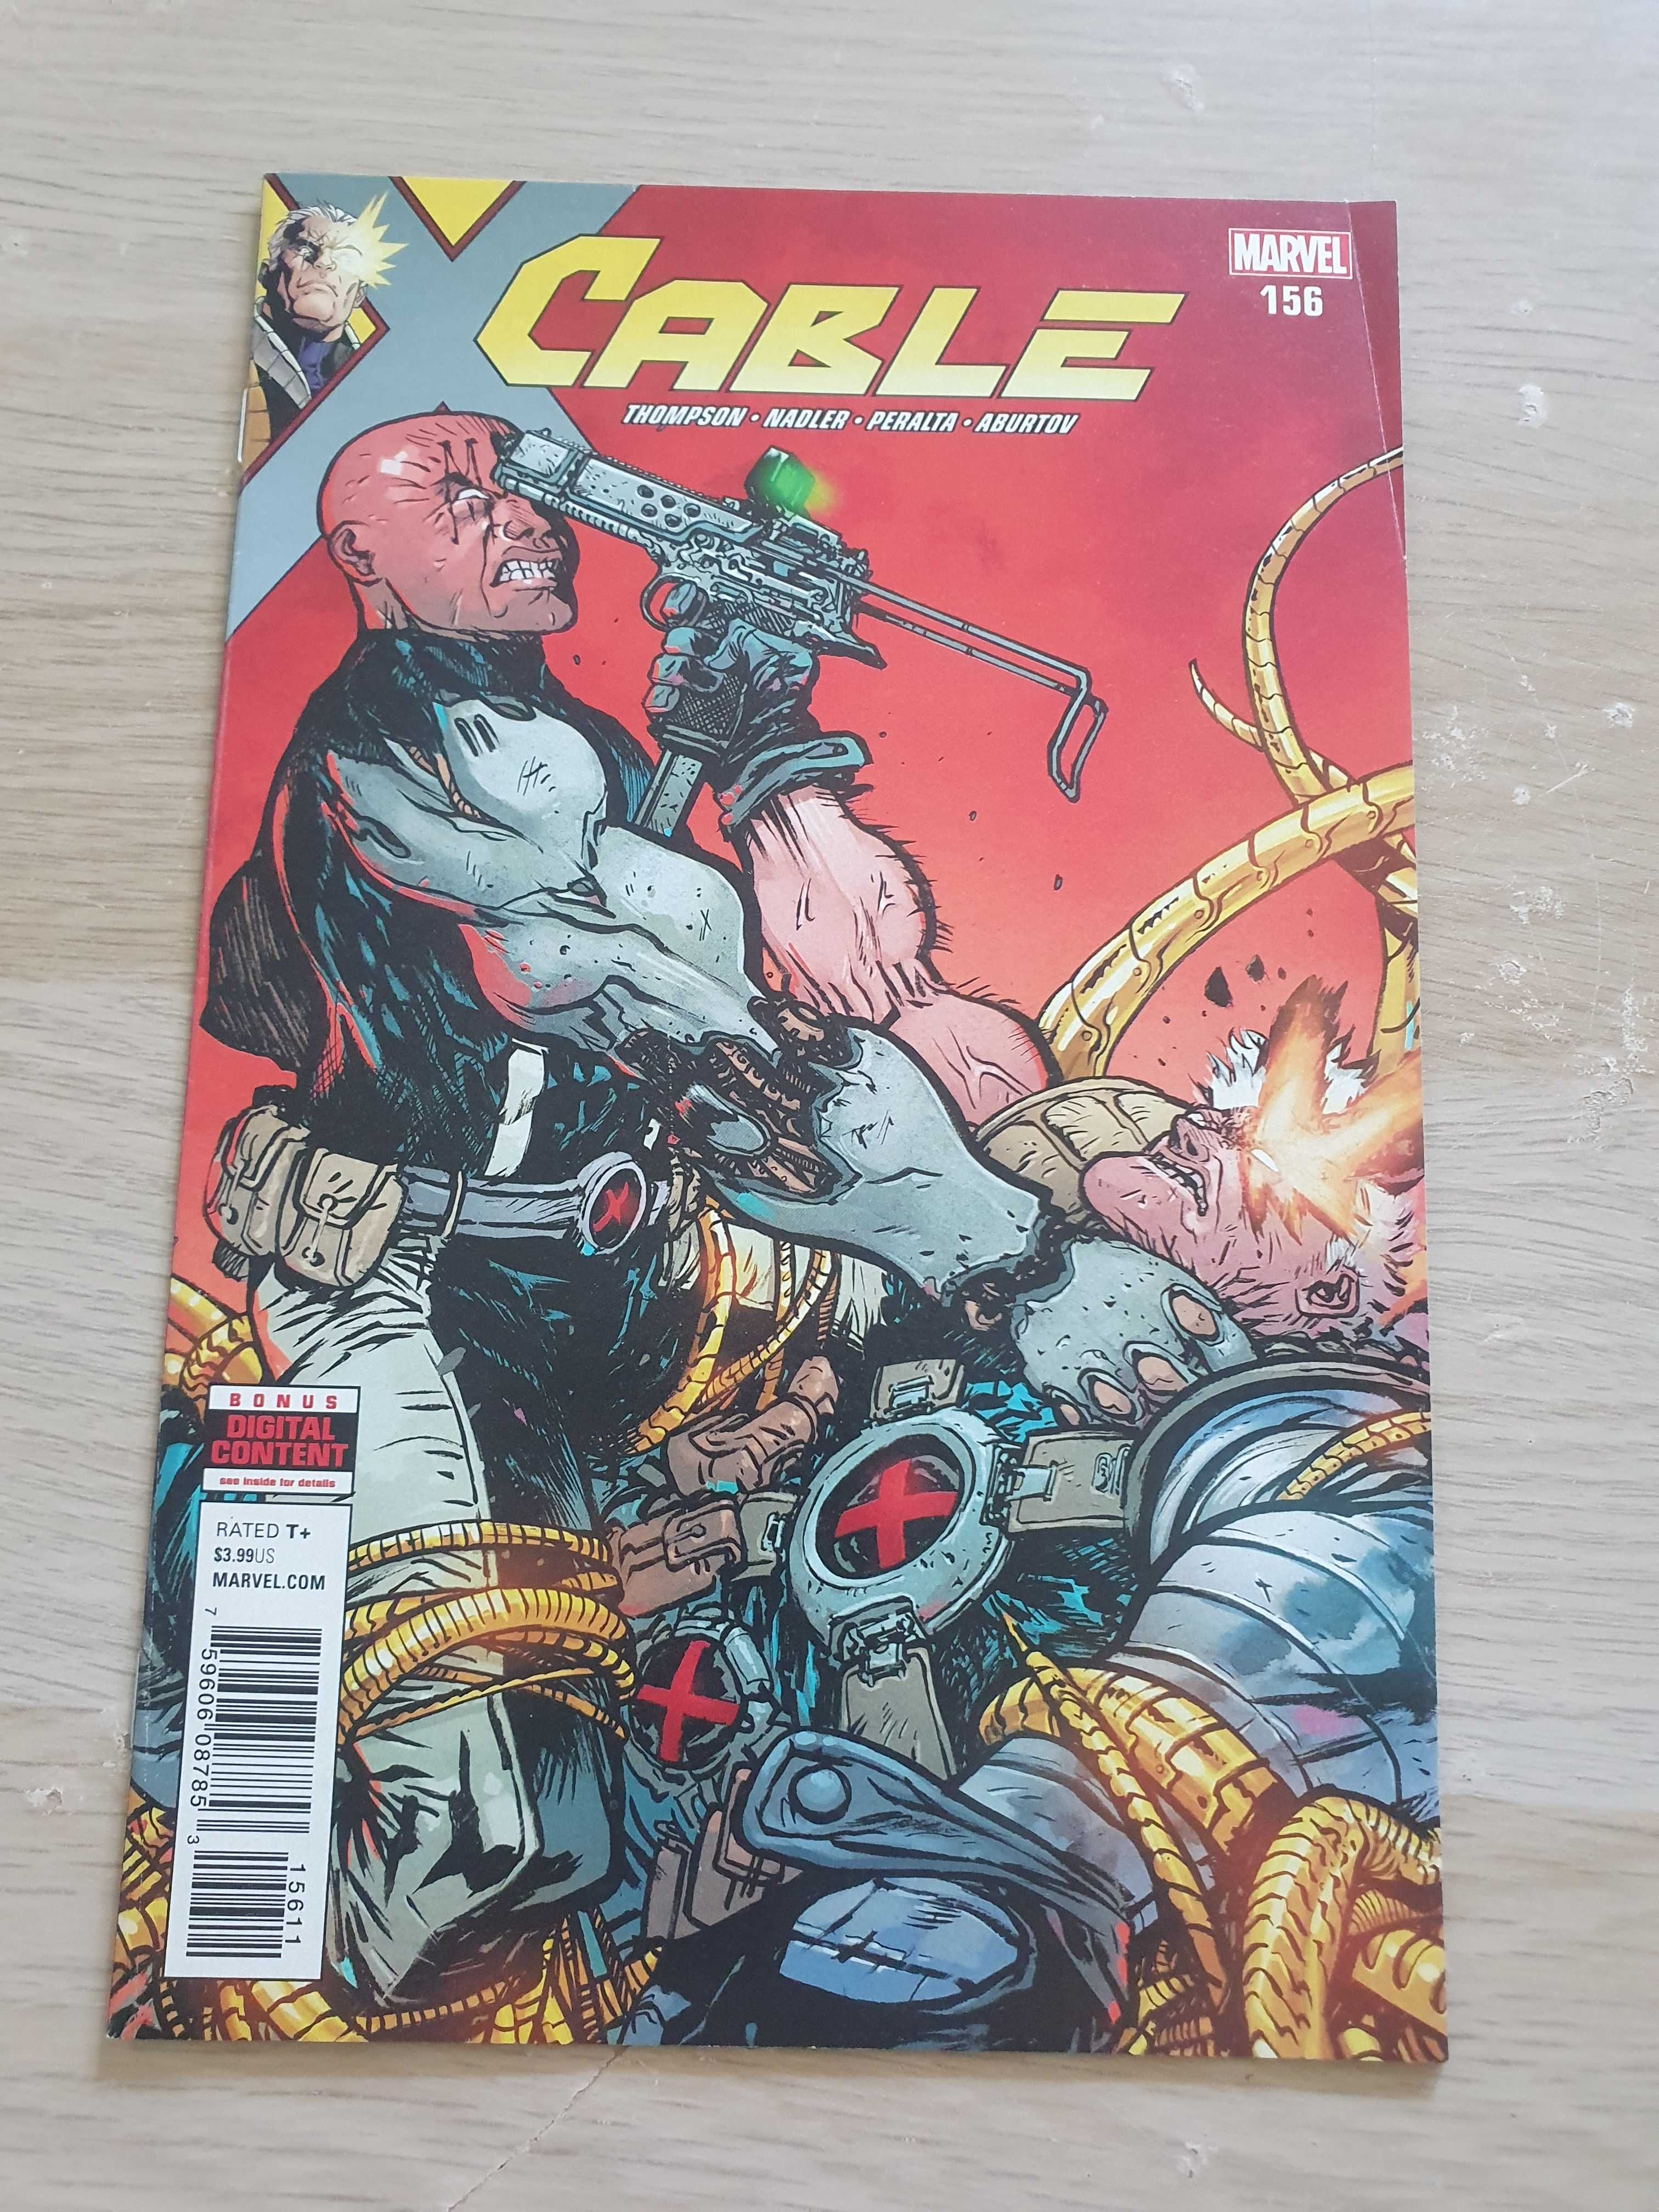 Cable Blood and Metal: 2; vol. 3: 1; vol. 4: 2, 9, 10, 156, 159 (ZM87)